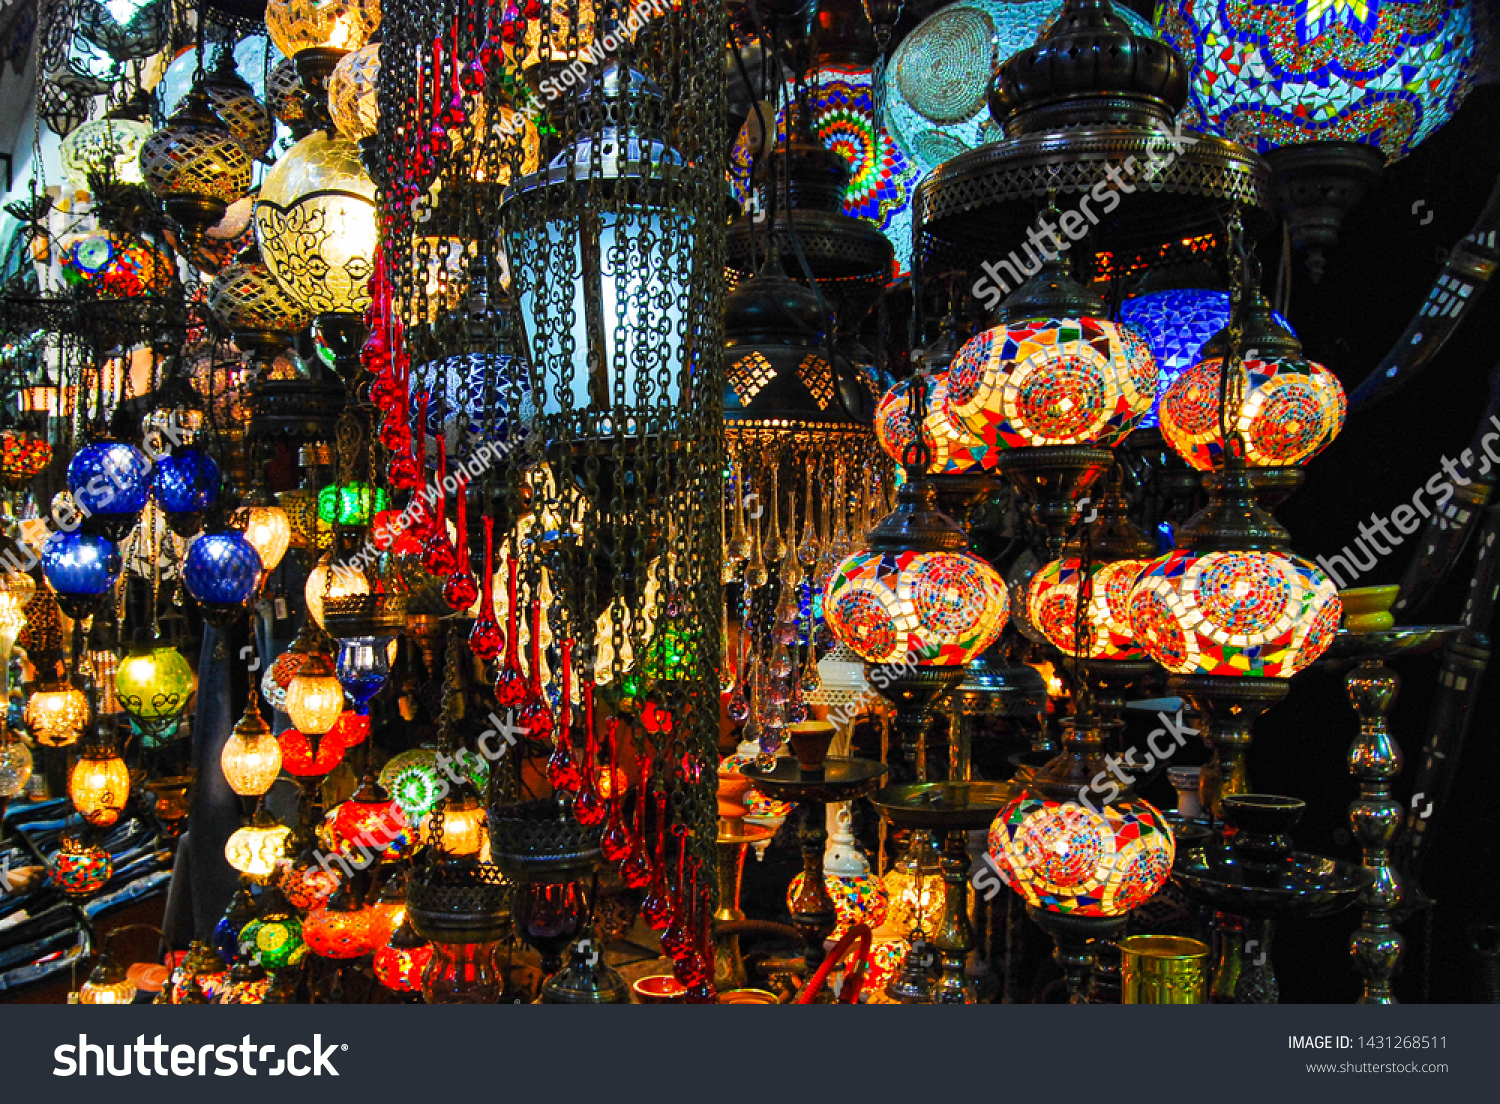 Beautiful Turkish lanterns in assortment of rich and bright colors shining brightly in a bazaar #1431268511